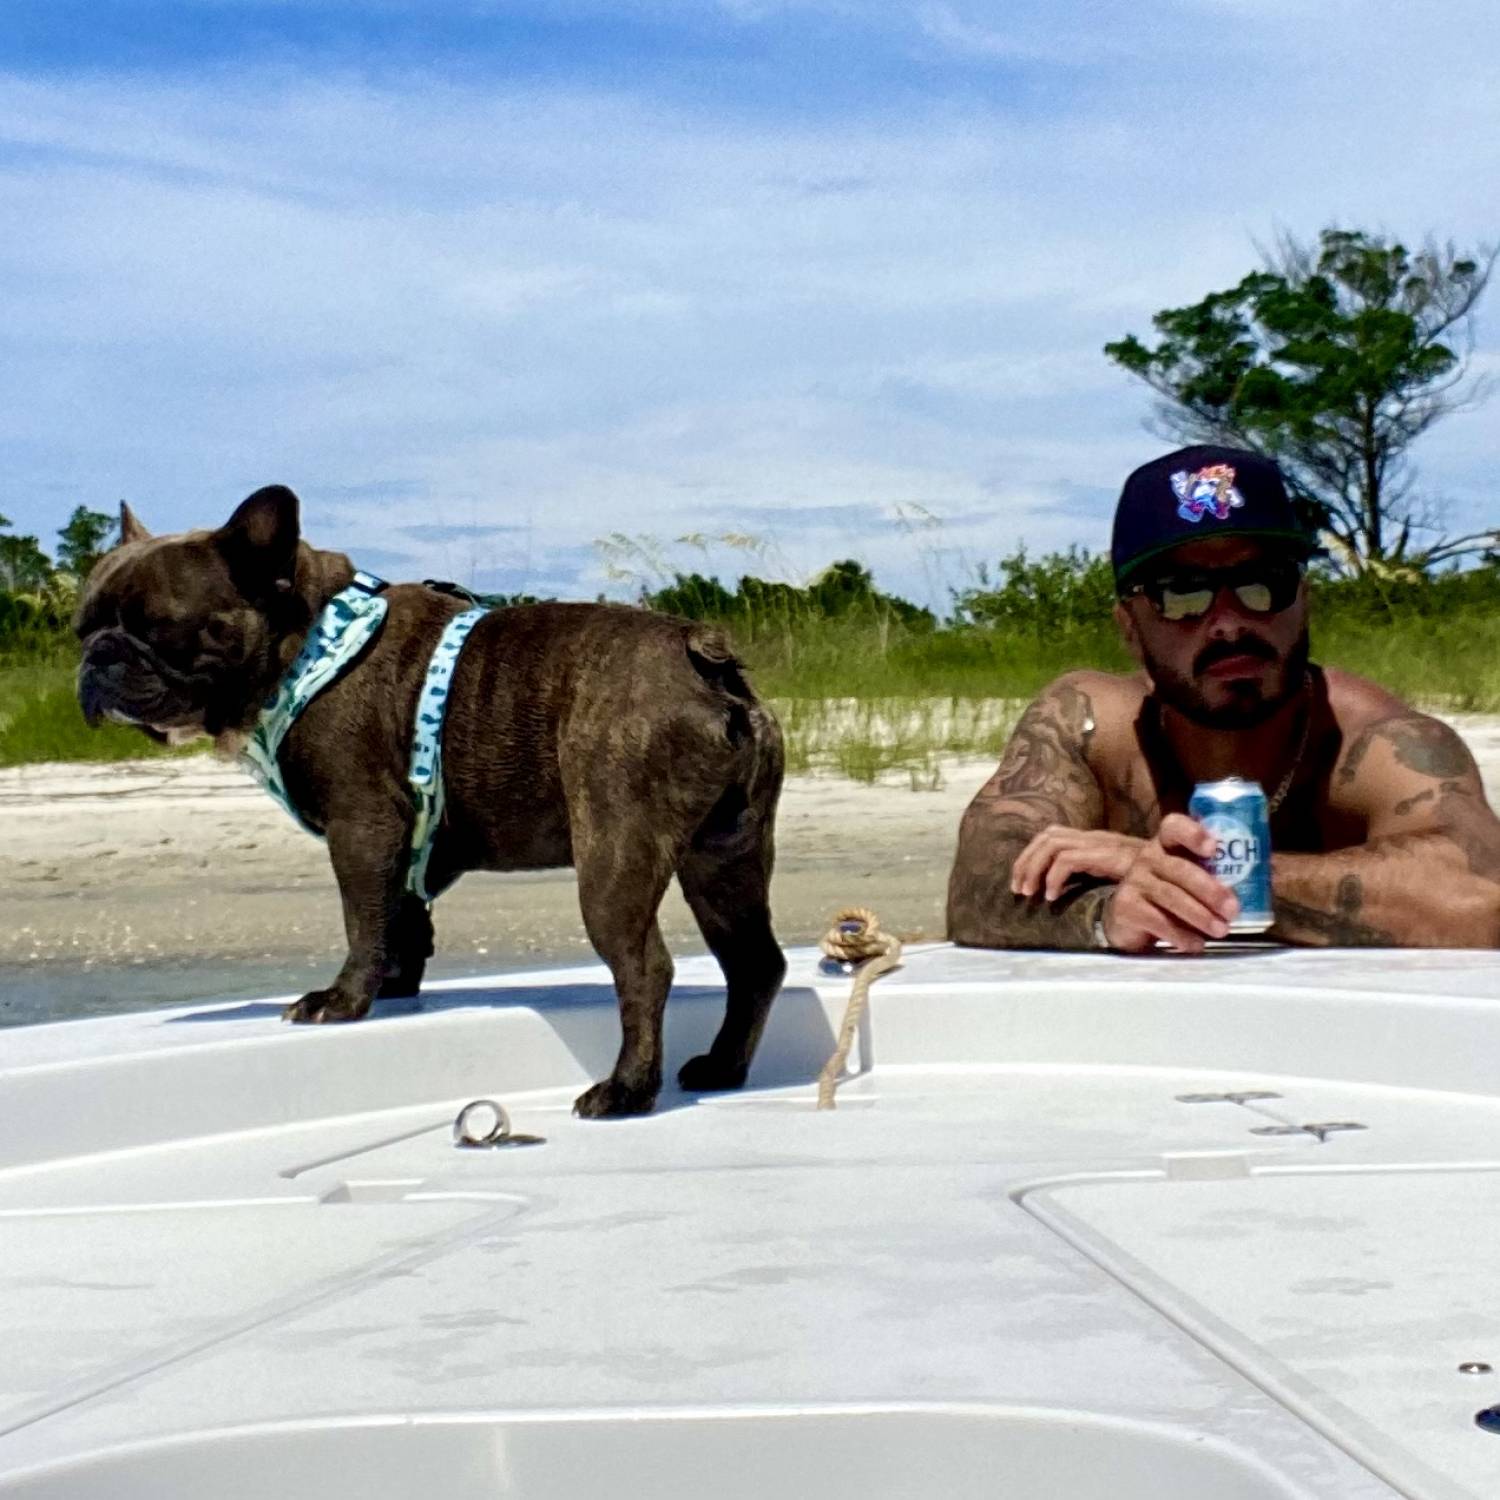 Title: Captain Diesel - On board their Sportsman Masters 227 Bay Boat - Location: St. Augustine, FL. Participating in the Photo Contest #SportsmanSeptember